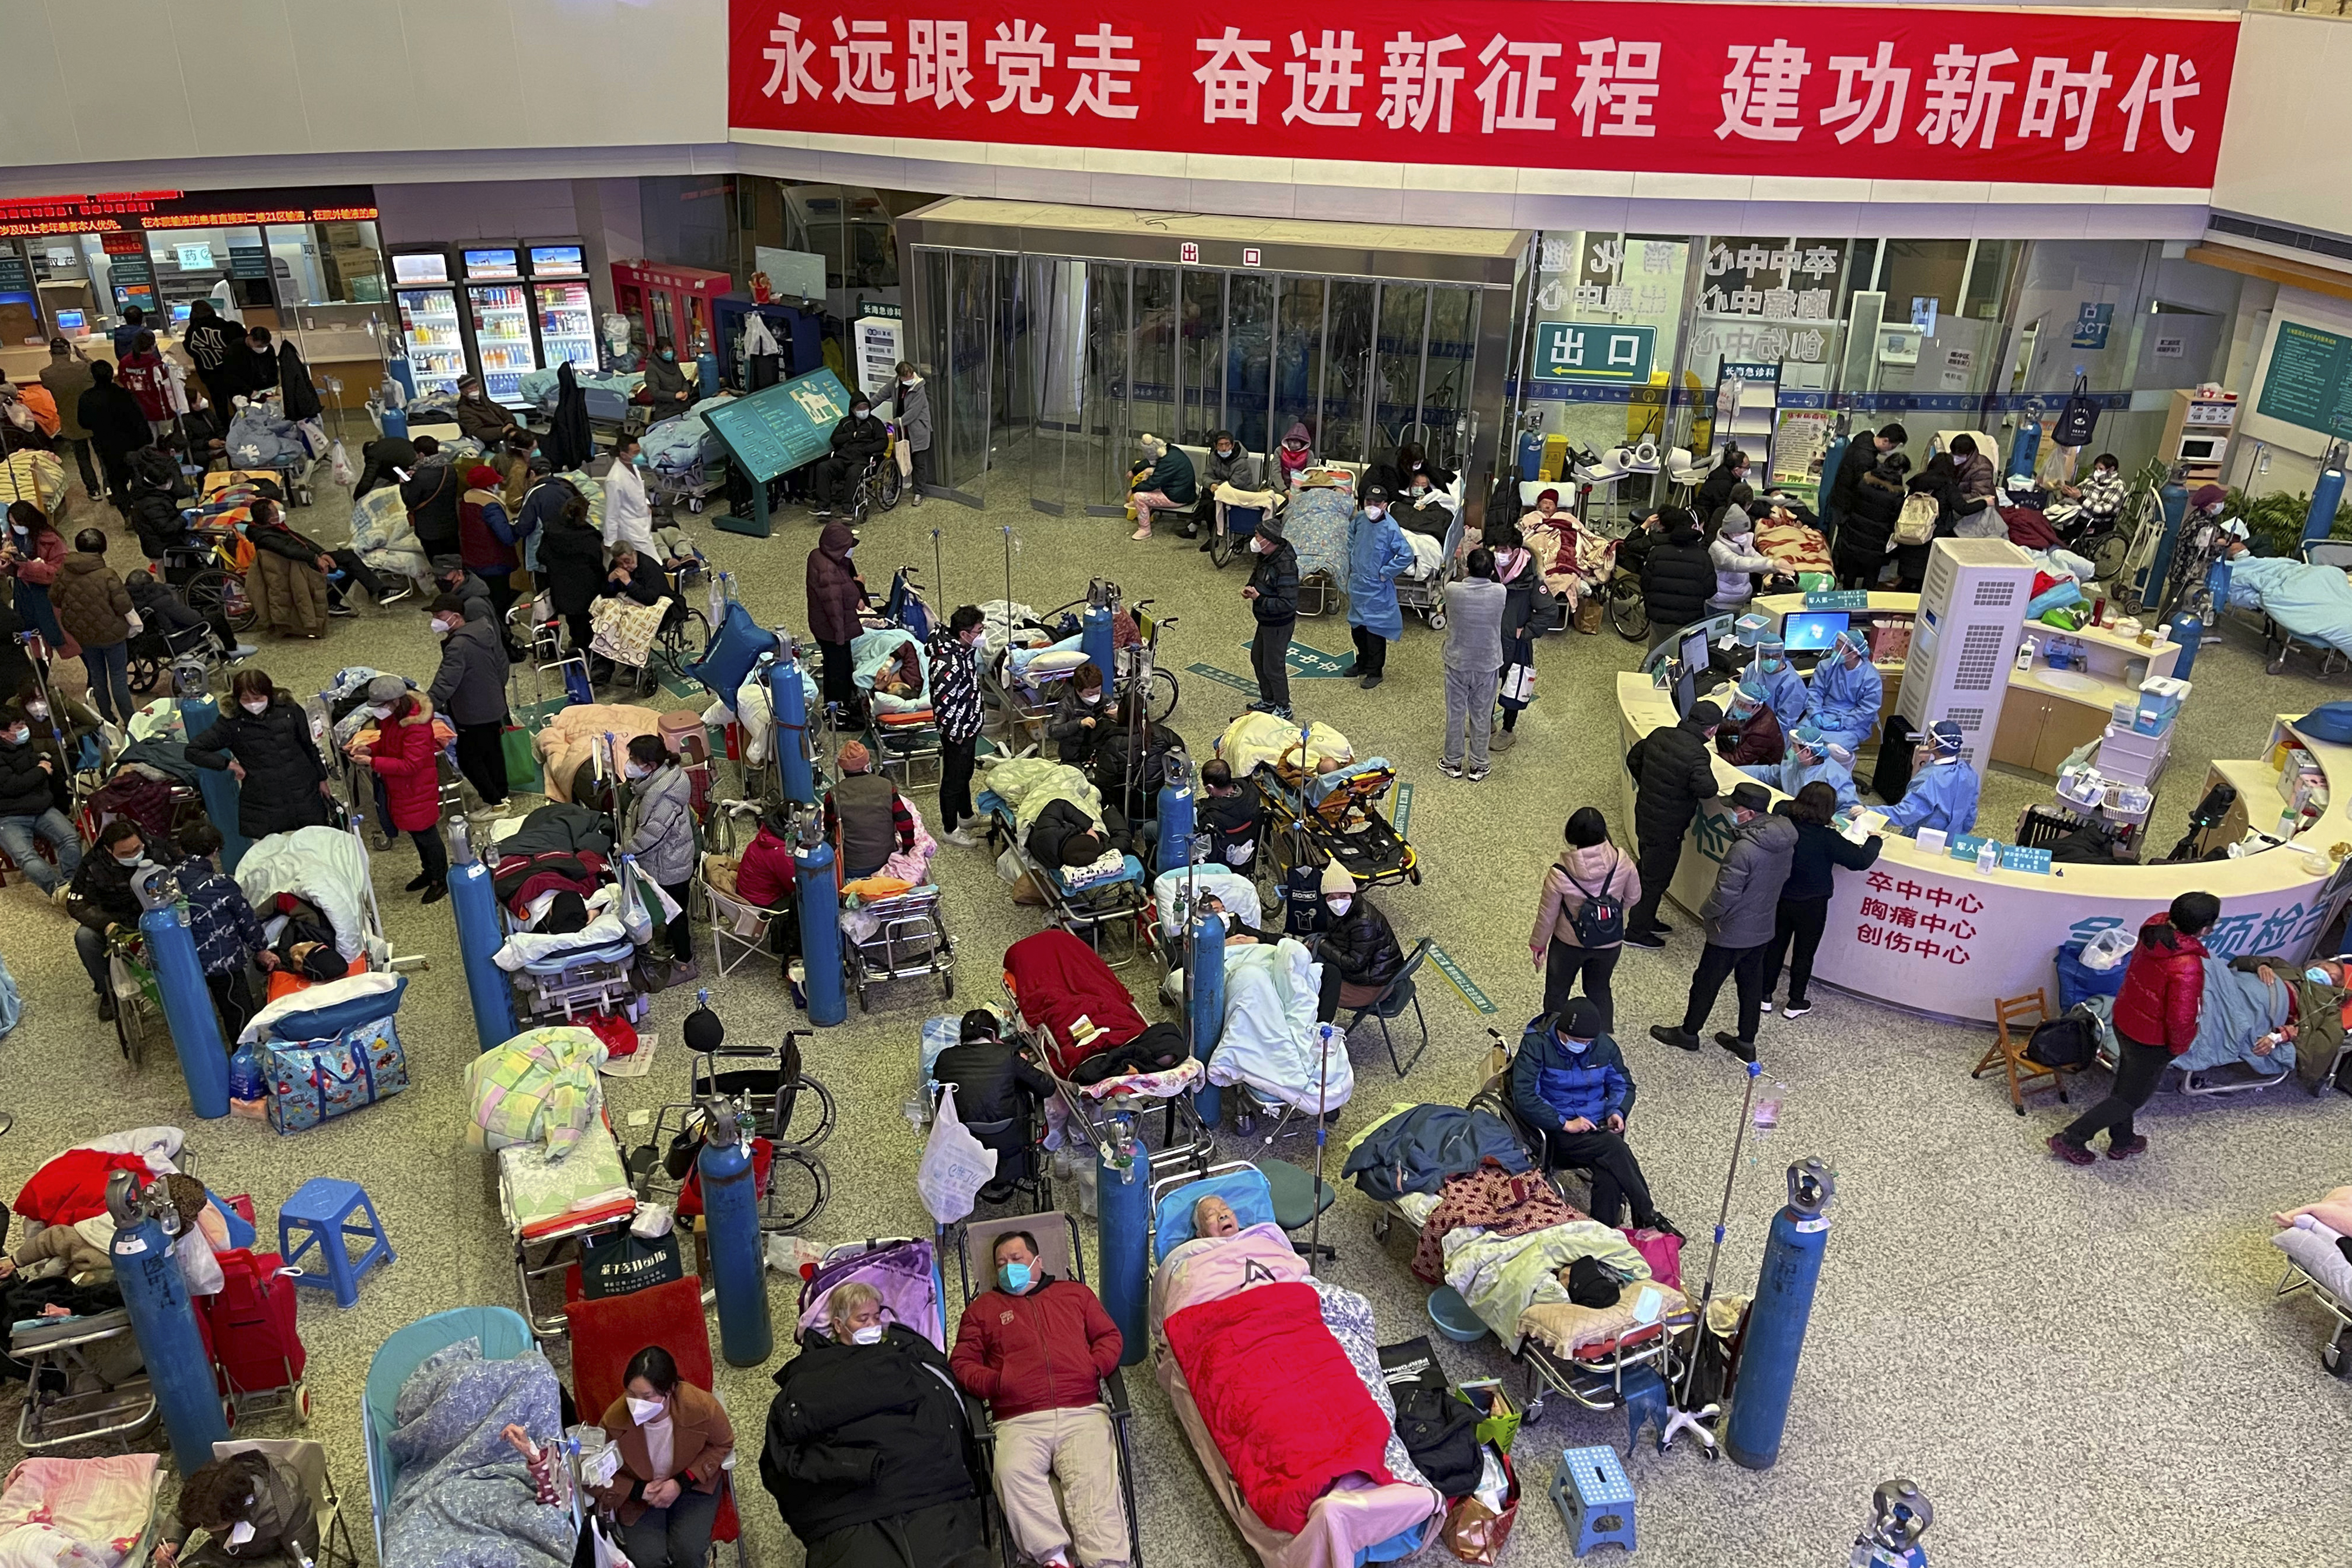 Patients, mostly older adults with COVID symptoms, congregate in a ward at Shanghai Hospital for medical care